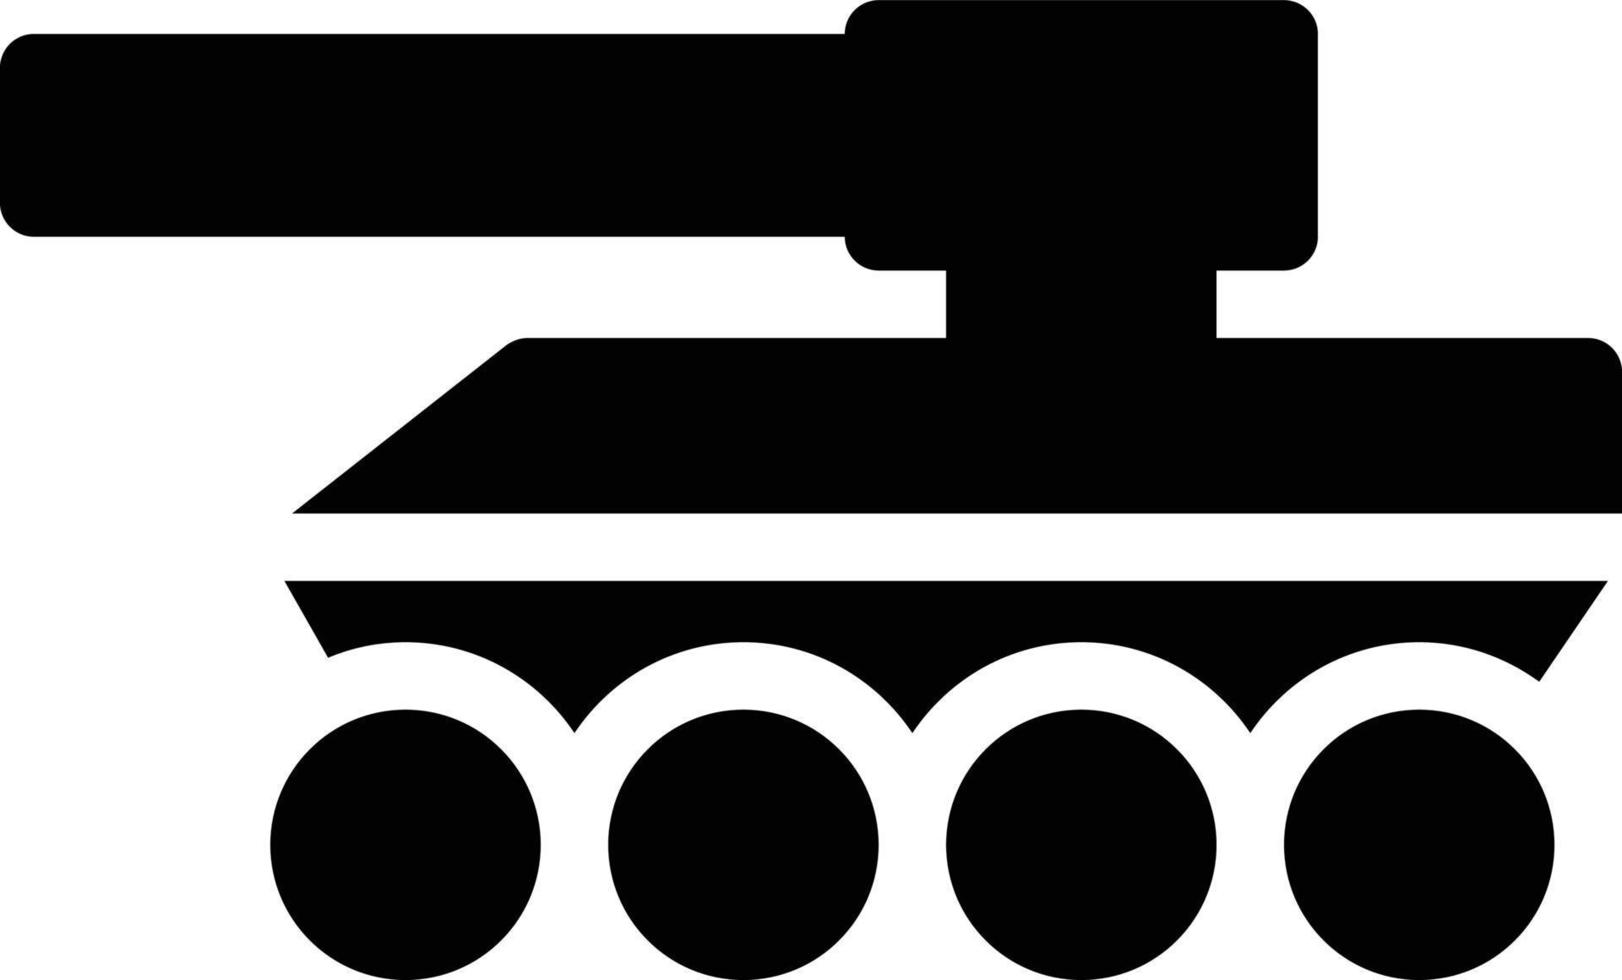 tank vector illustration on a background.Premium quality symbols. vector icons for concept and graphic design.